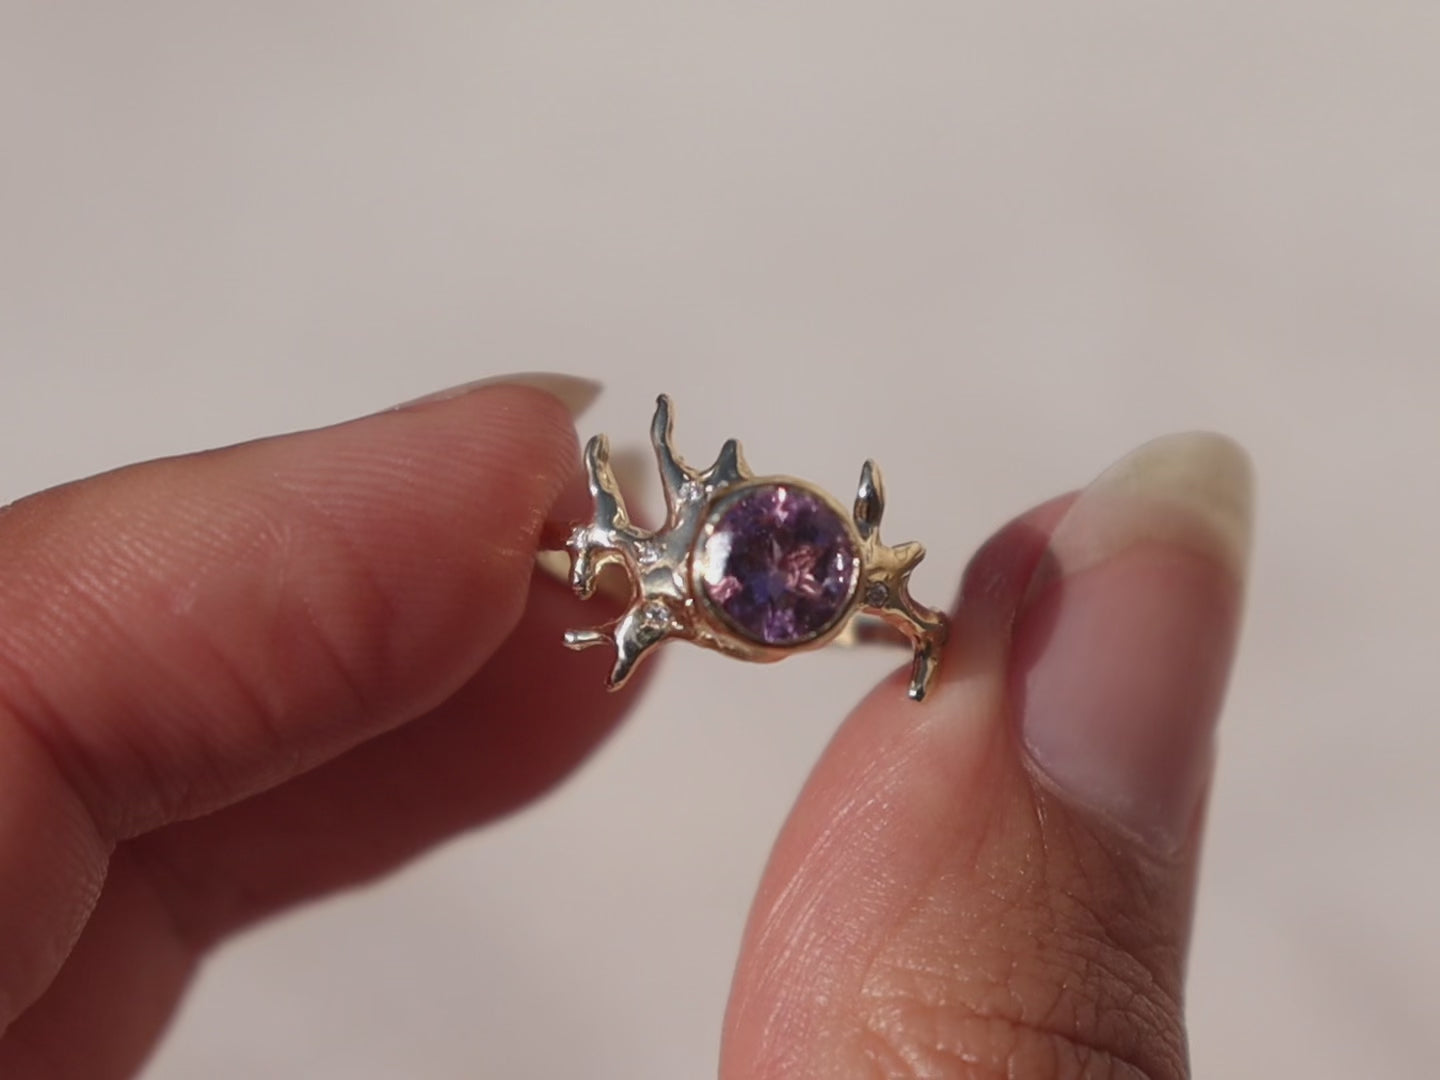 close up video of an exquisite round brilliant cut ametrine gemstone, bezel-set in a gold band with an organic coral-like design, adorned with sparkling diamond accents